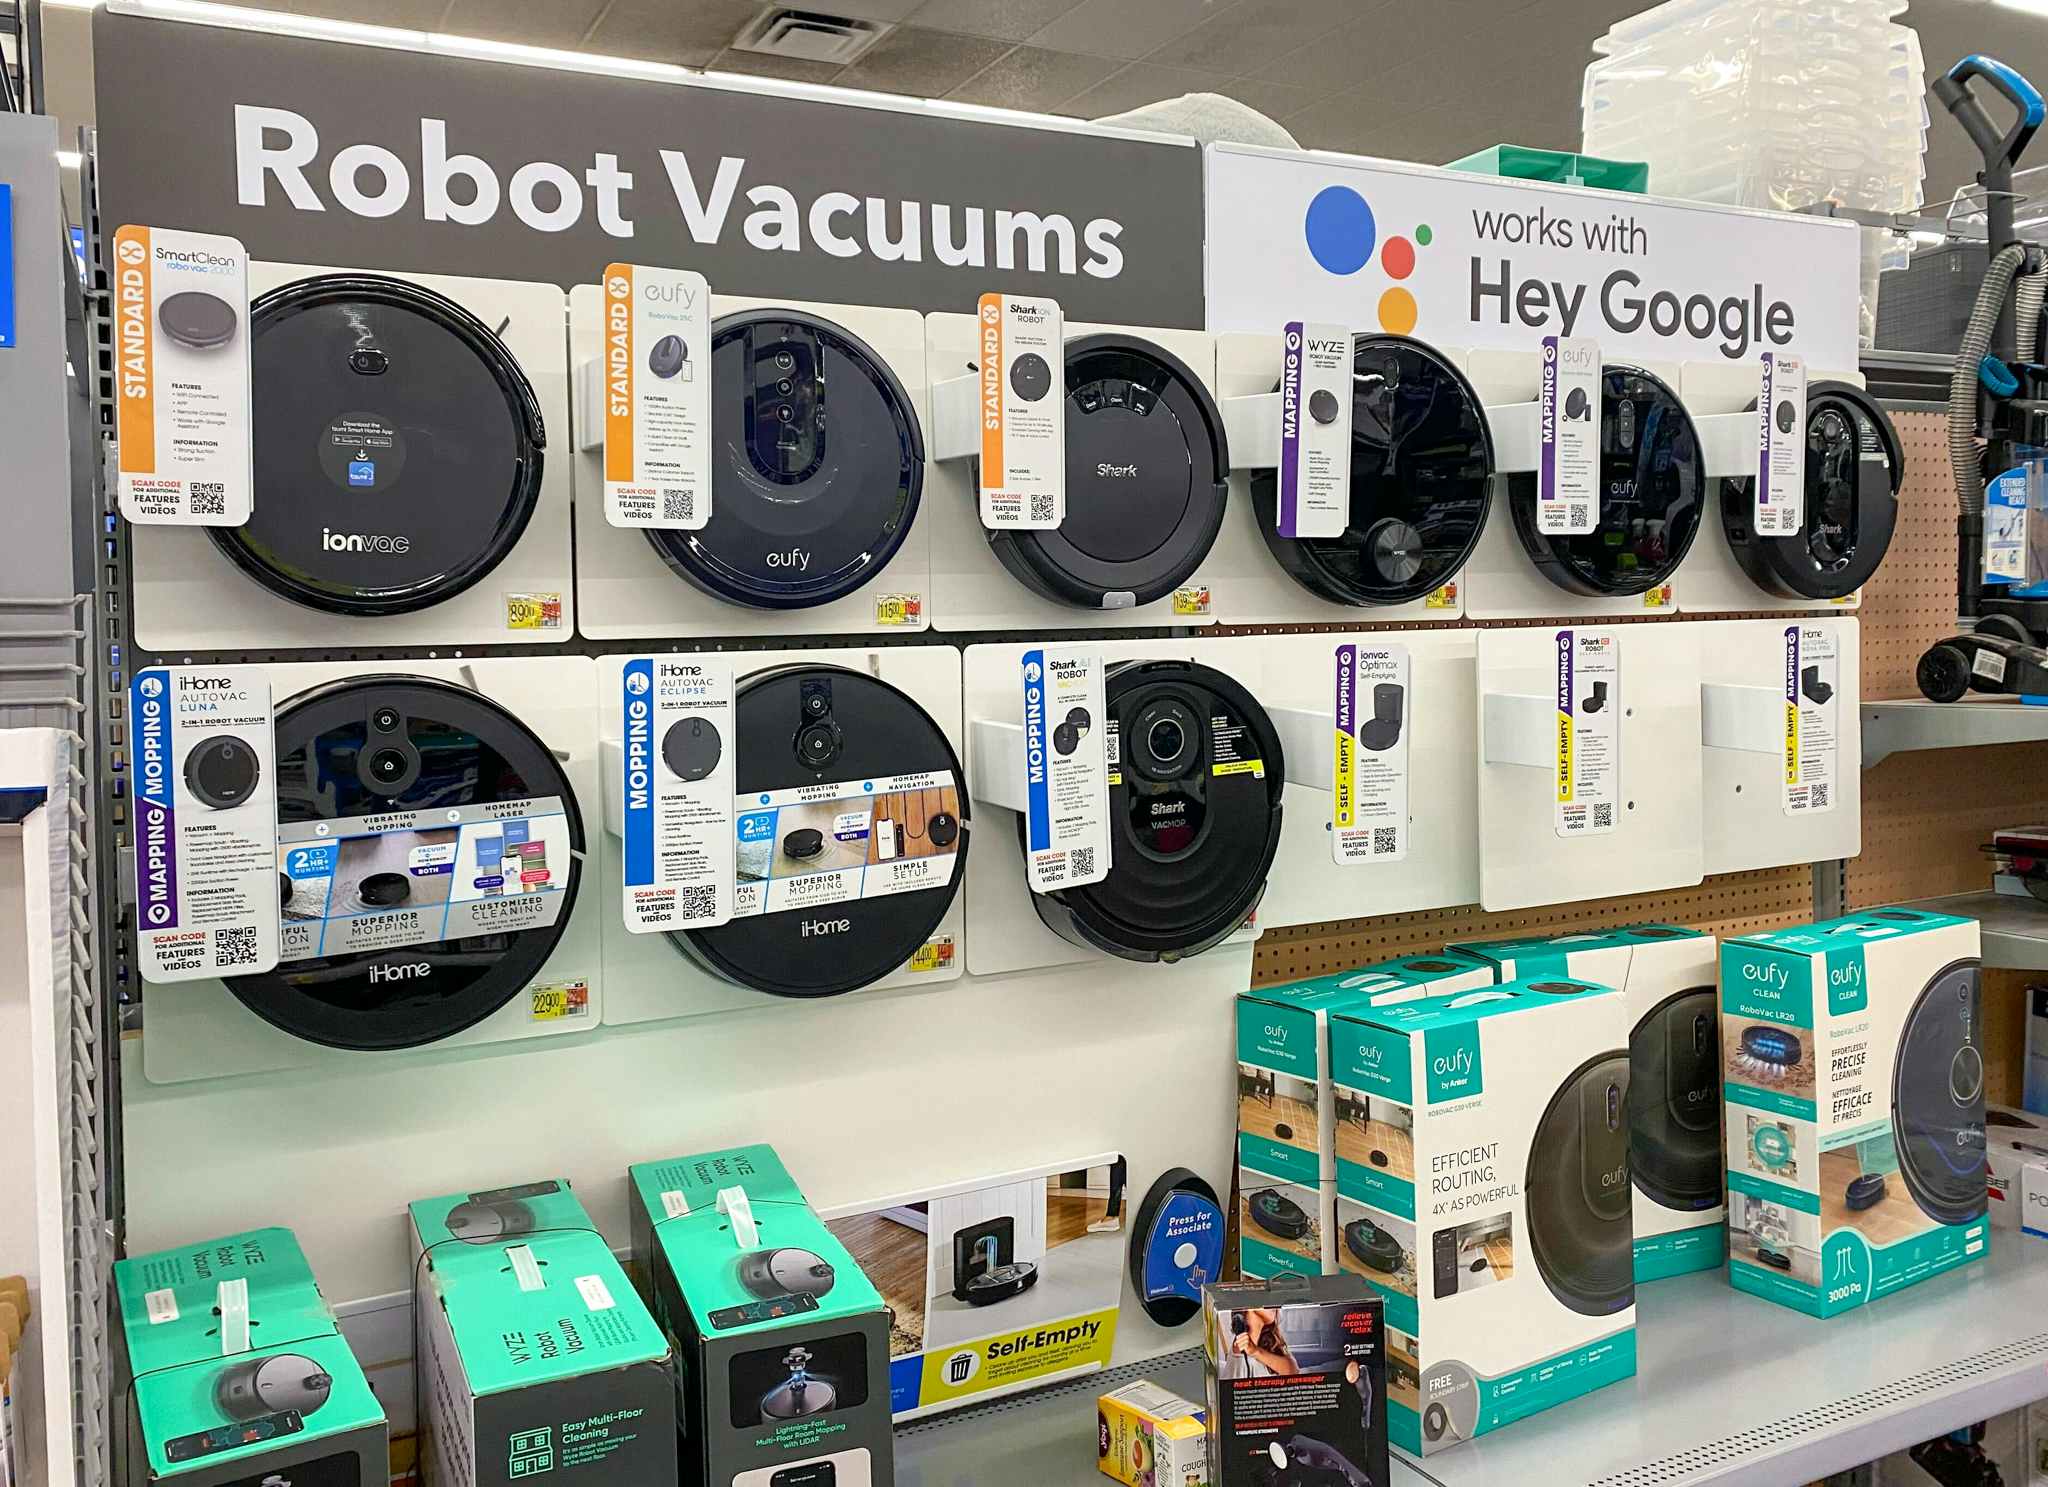 $50 Spot Cleaner, $50 Upright Vac, $69 Robot Vac at Walmart (Will Sell Out)